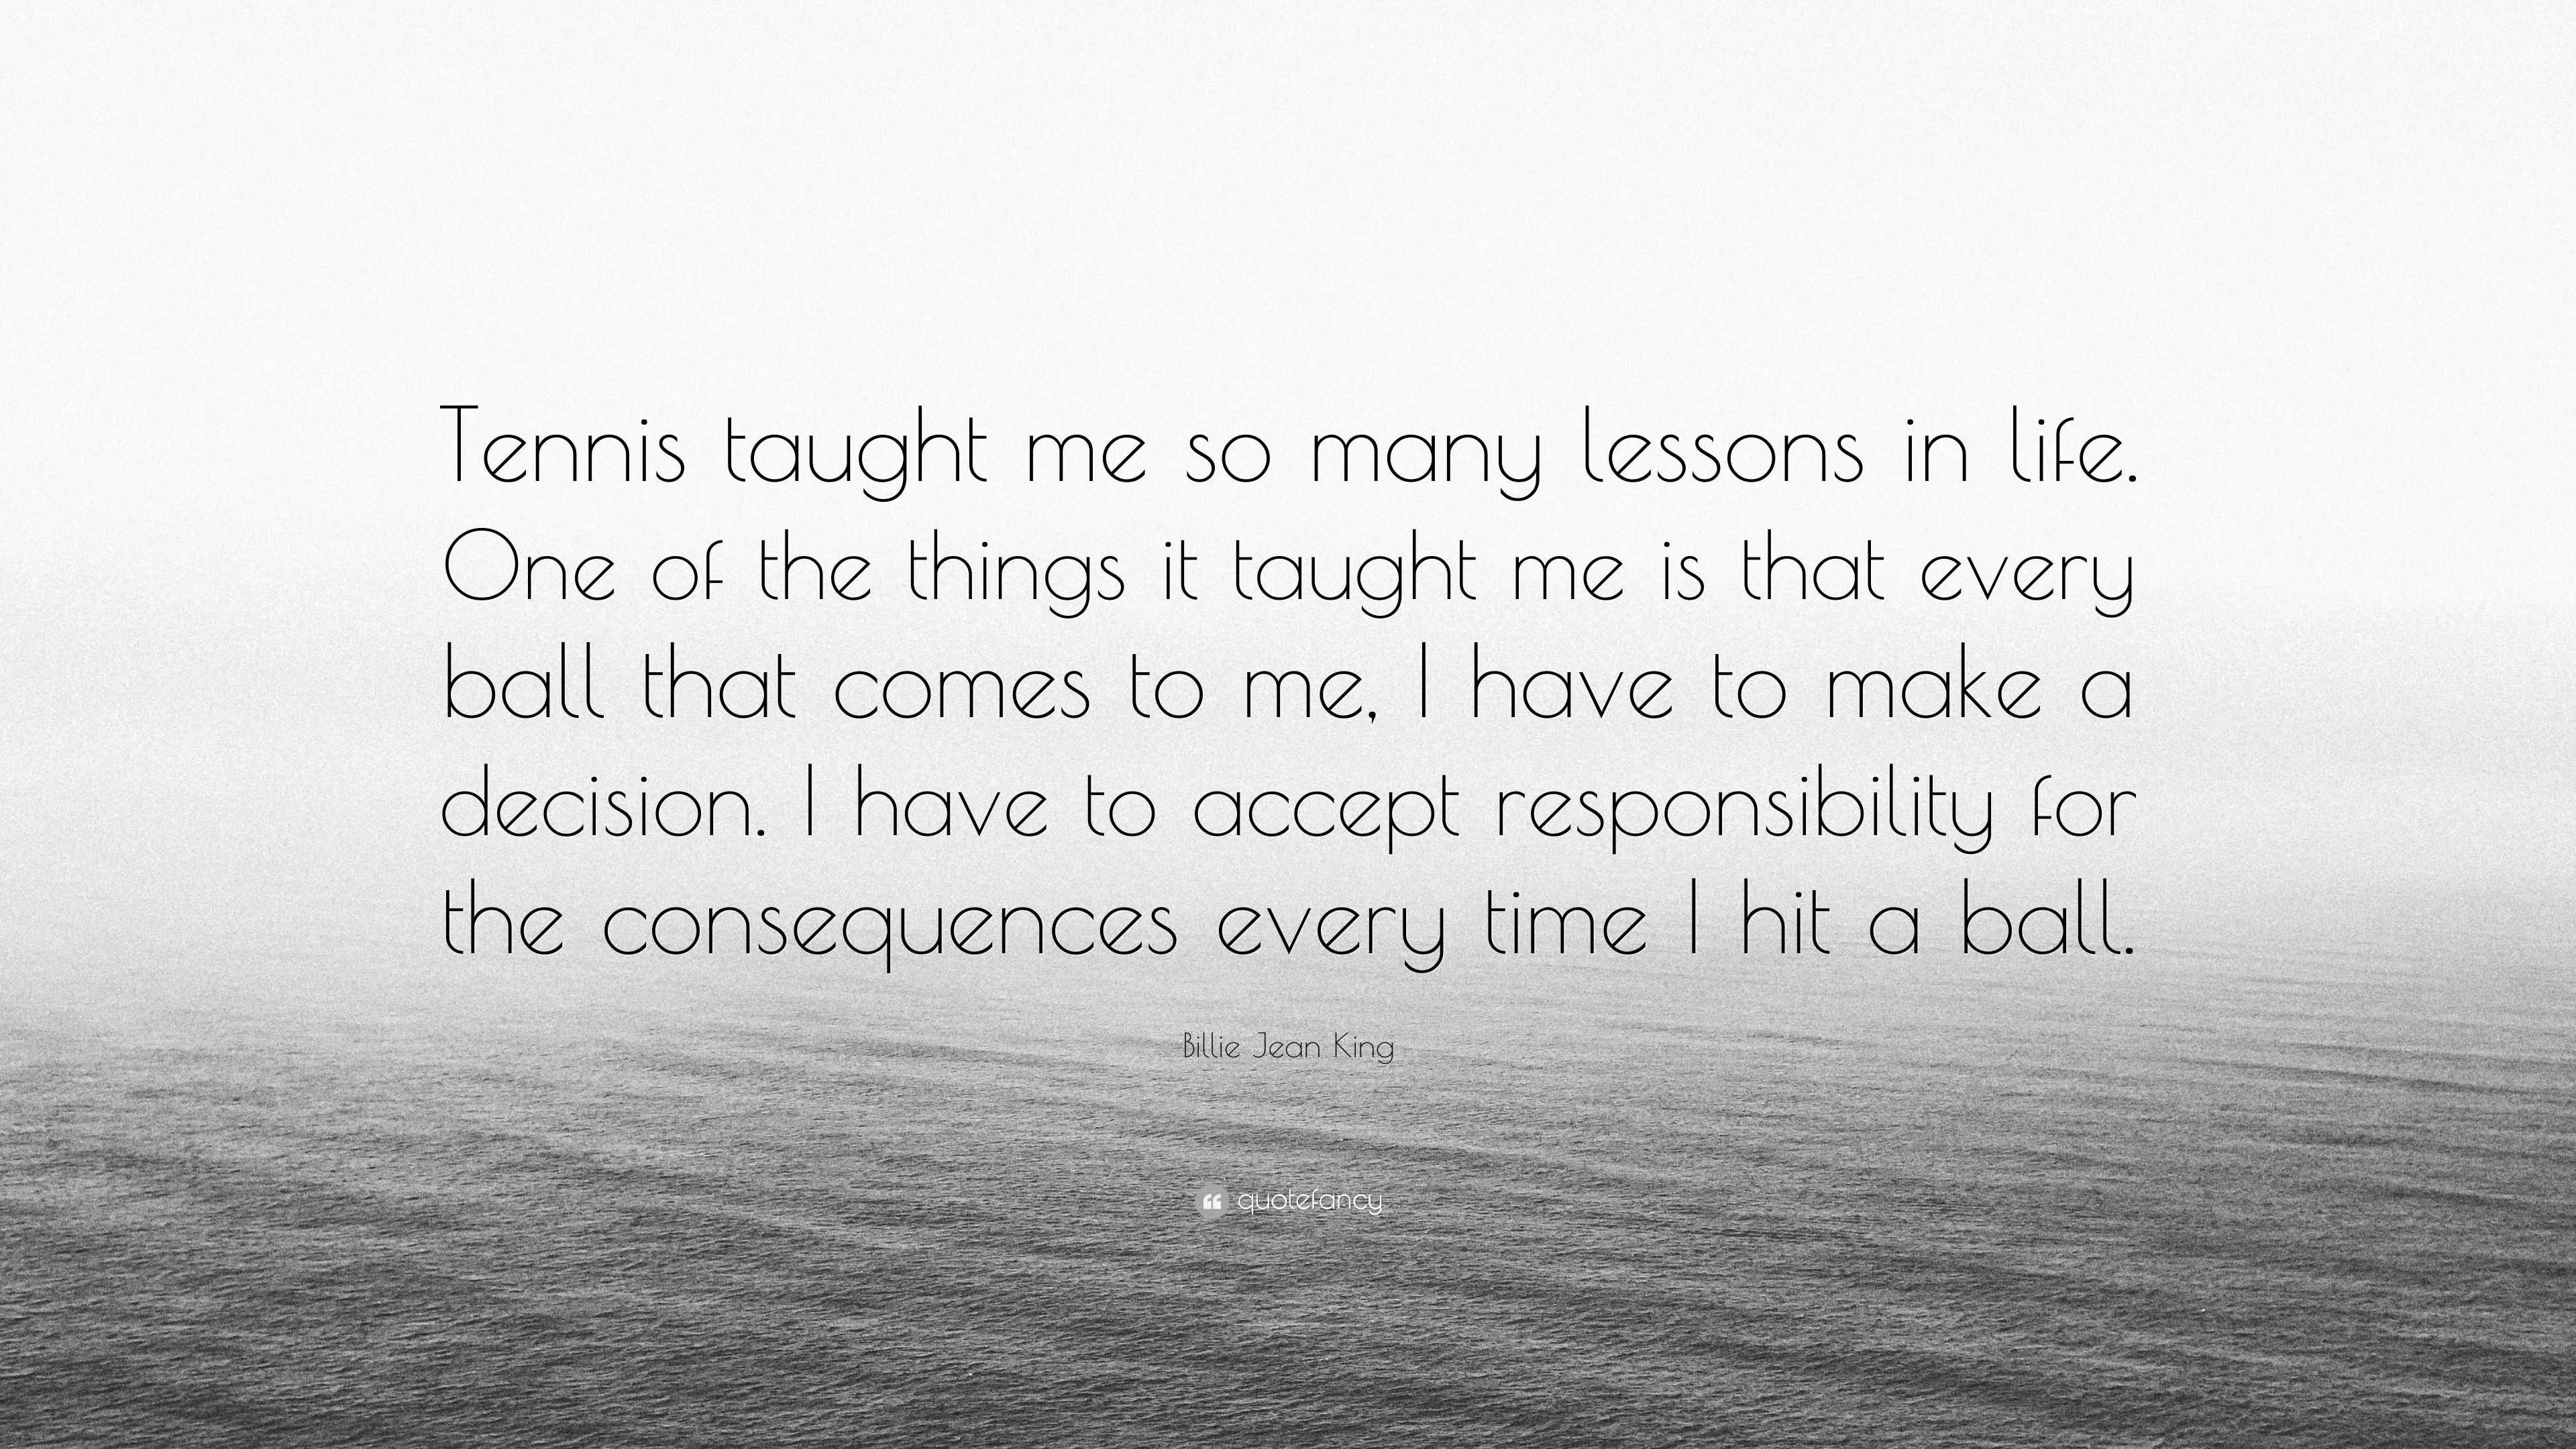 Billie Jean King Quote “Tennis taught me so many lessons in life e